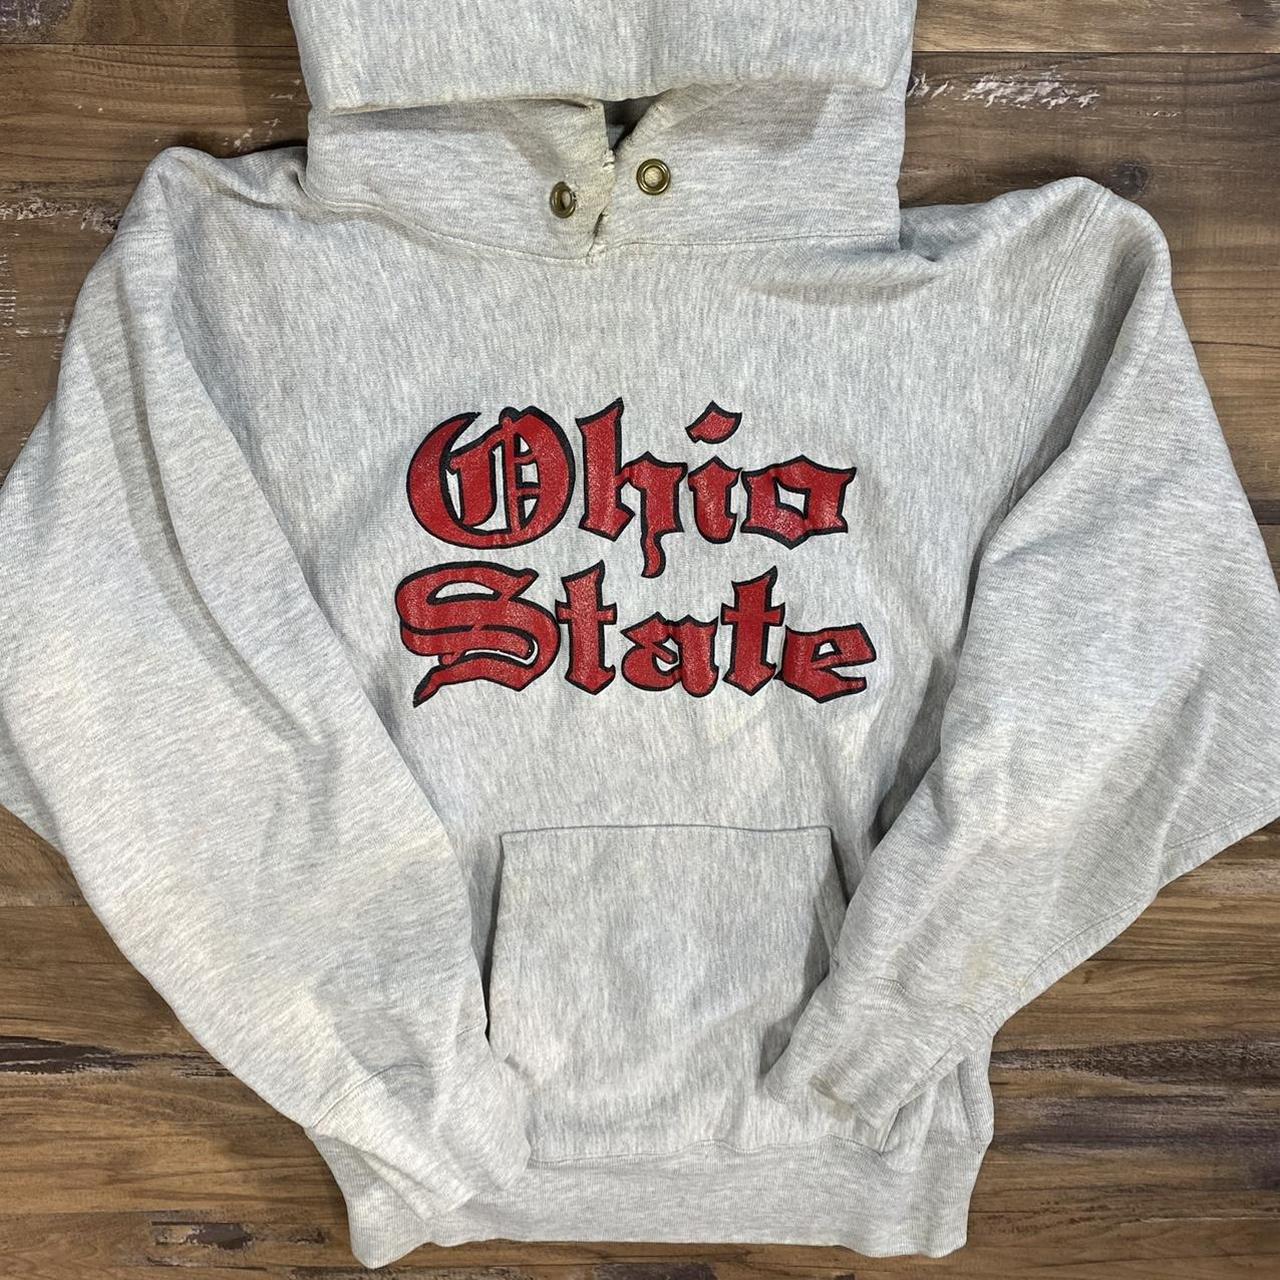 Vintage 80s Ohio state old English reverse weave...